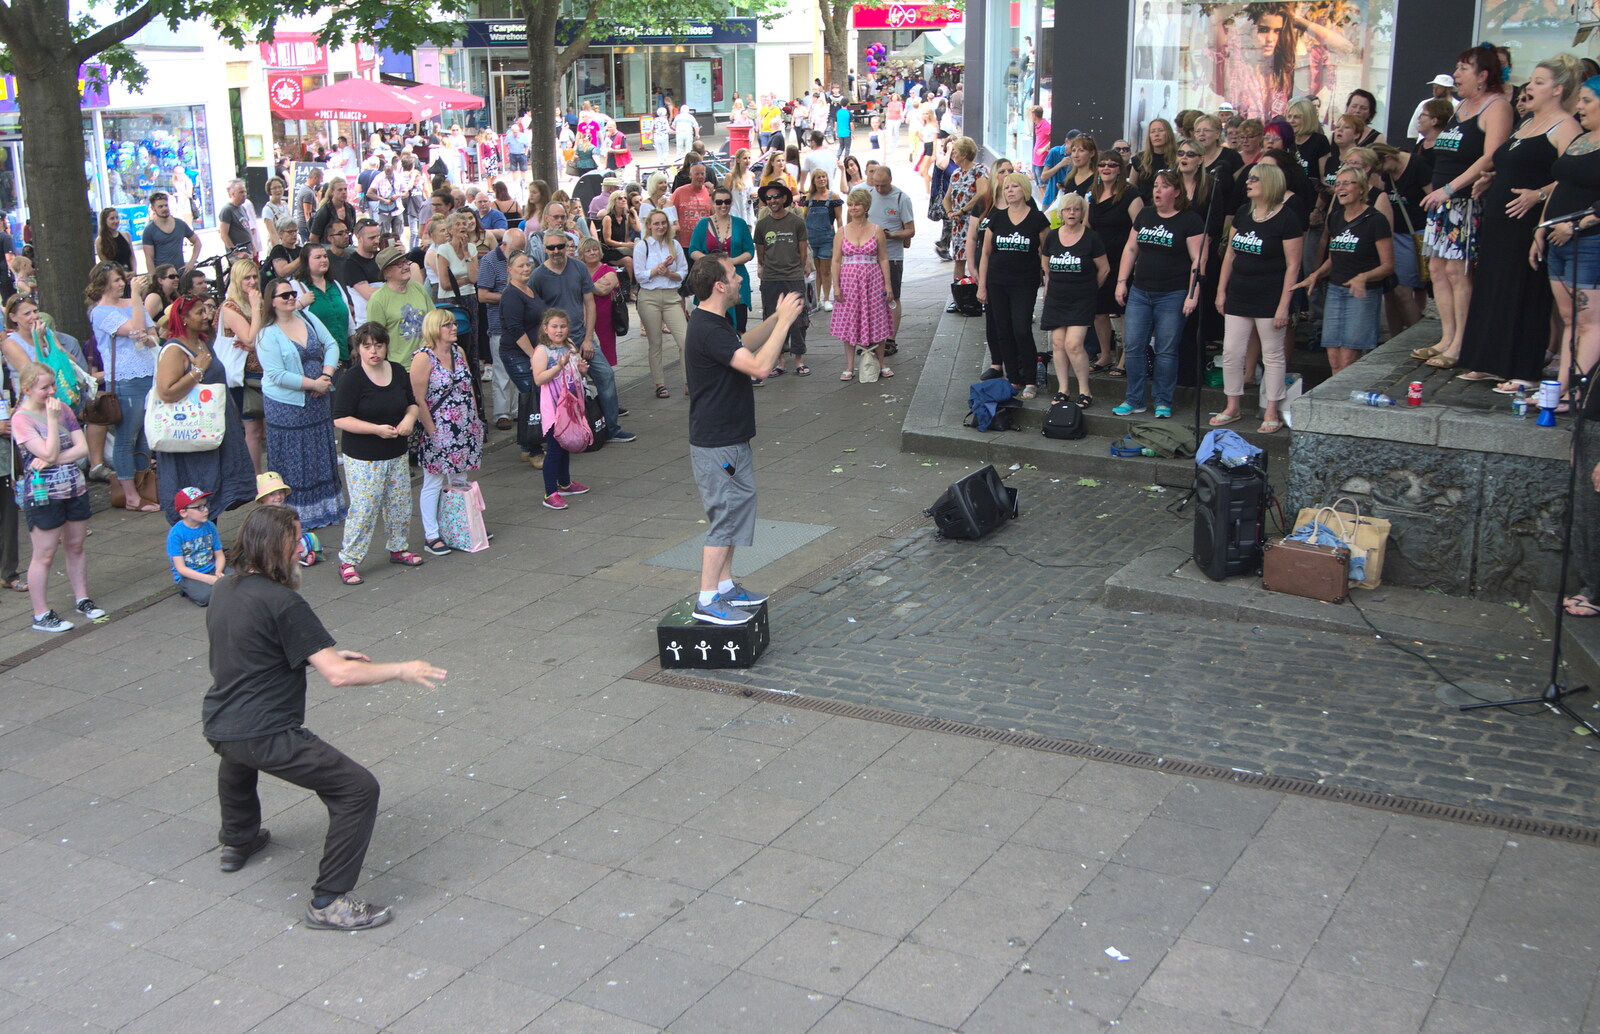 The 'Tennants Export' crowd gets in on the act from Isobel's Choral Flash Mob, Norwich, Norfolk - 17th June 2017